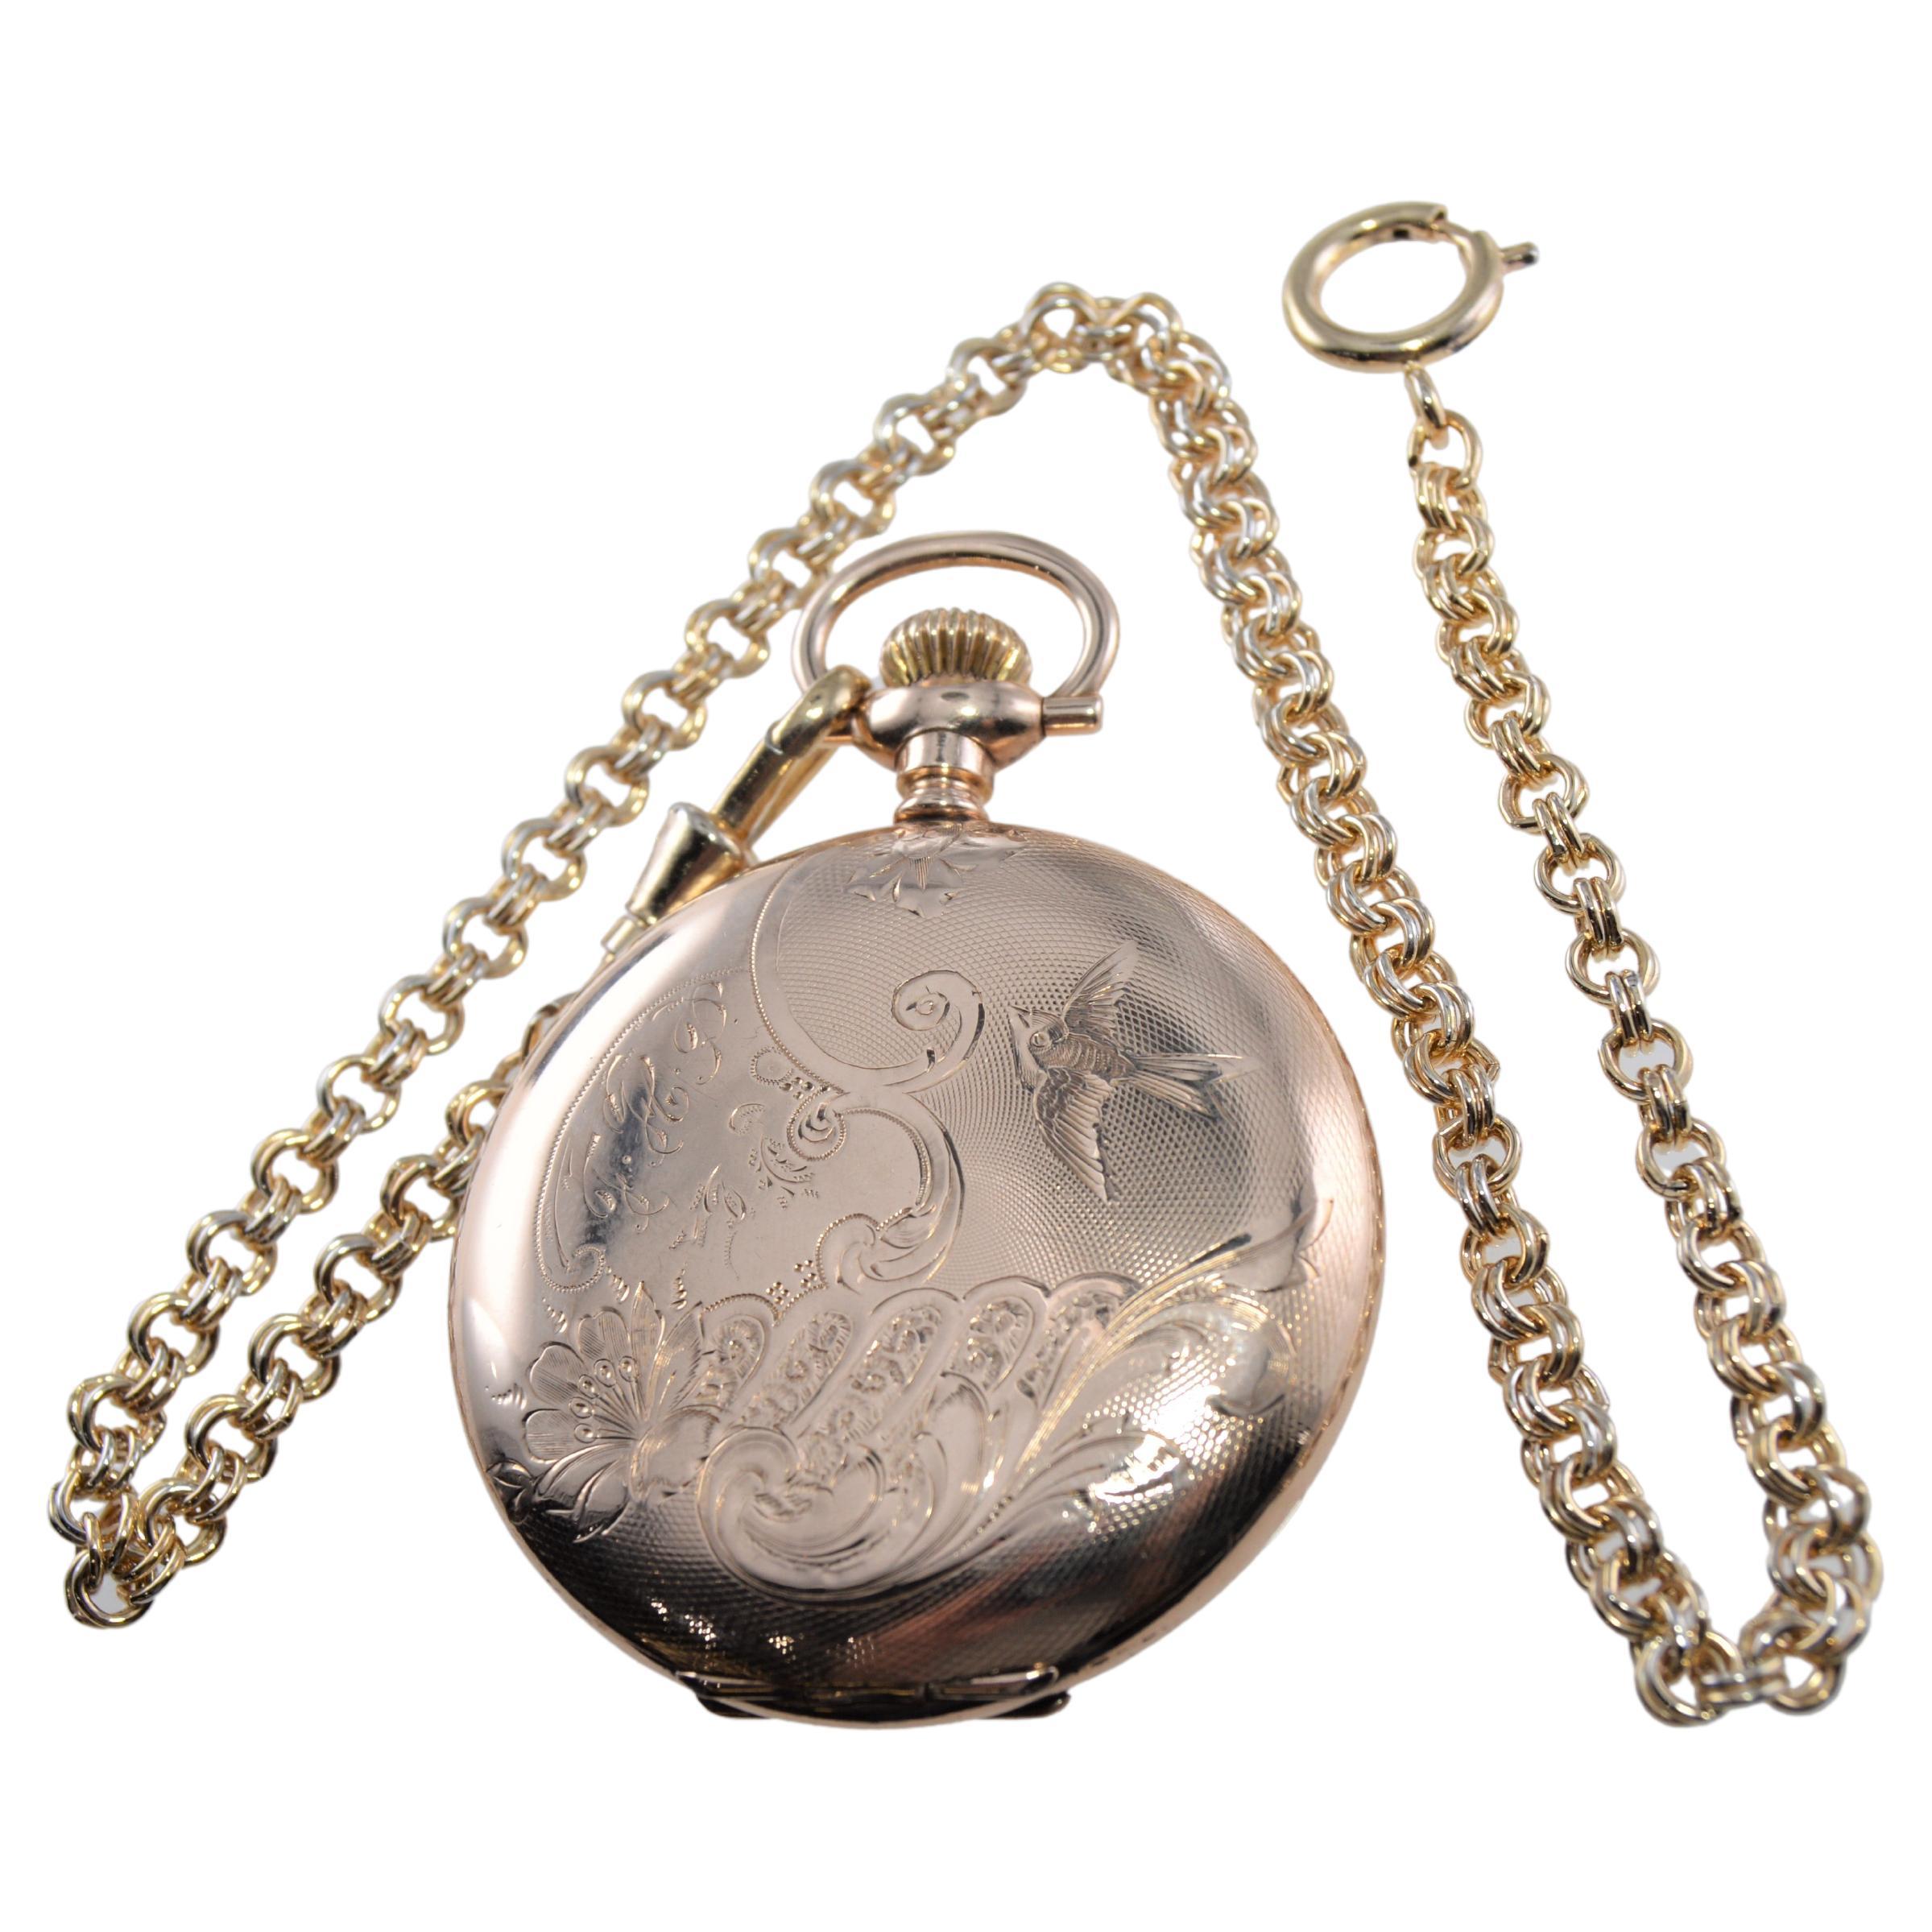 Waltham Yellow Gold Filled Hunters Case Pocket Watch 1901 For Sale